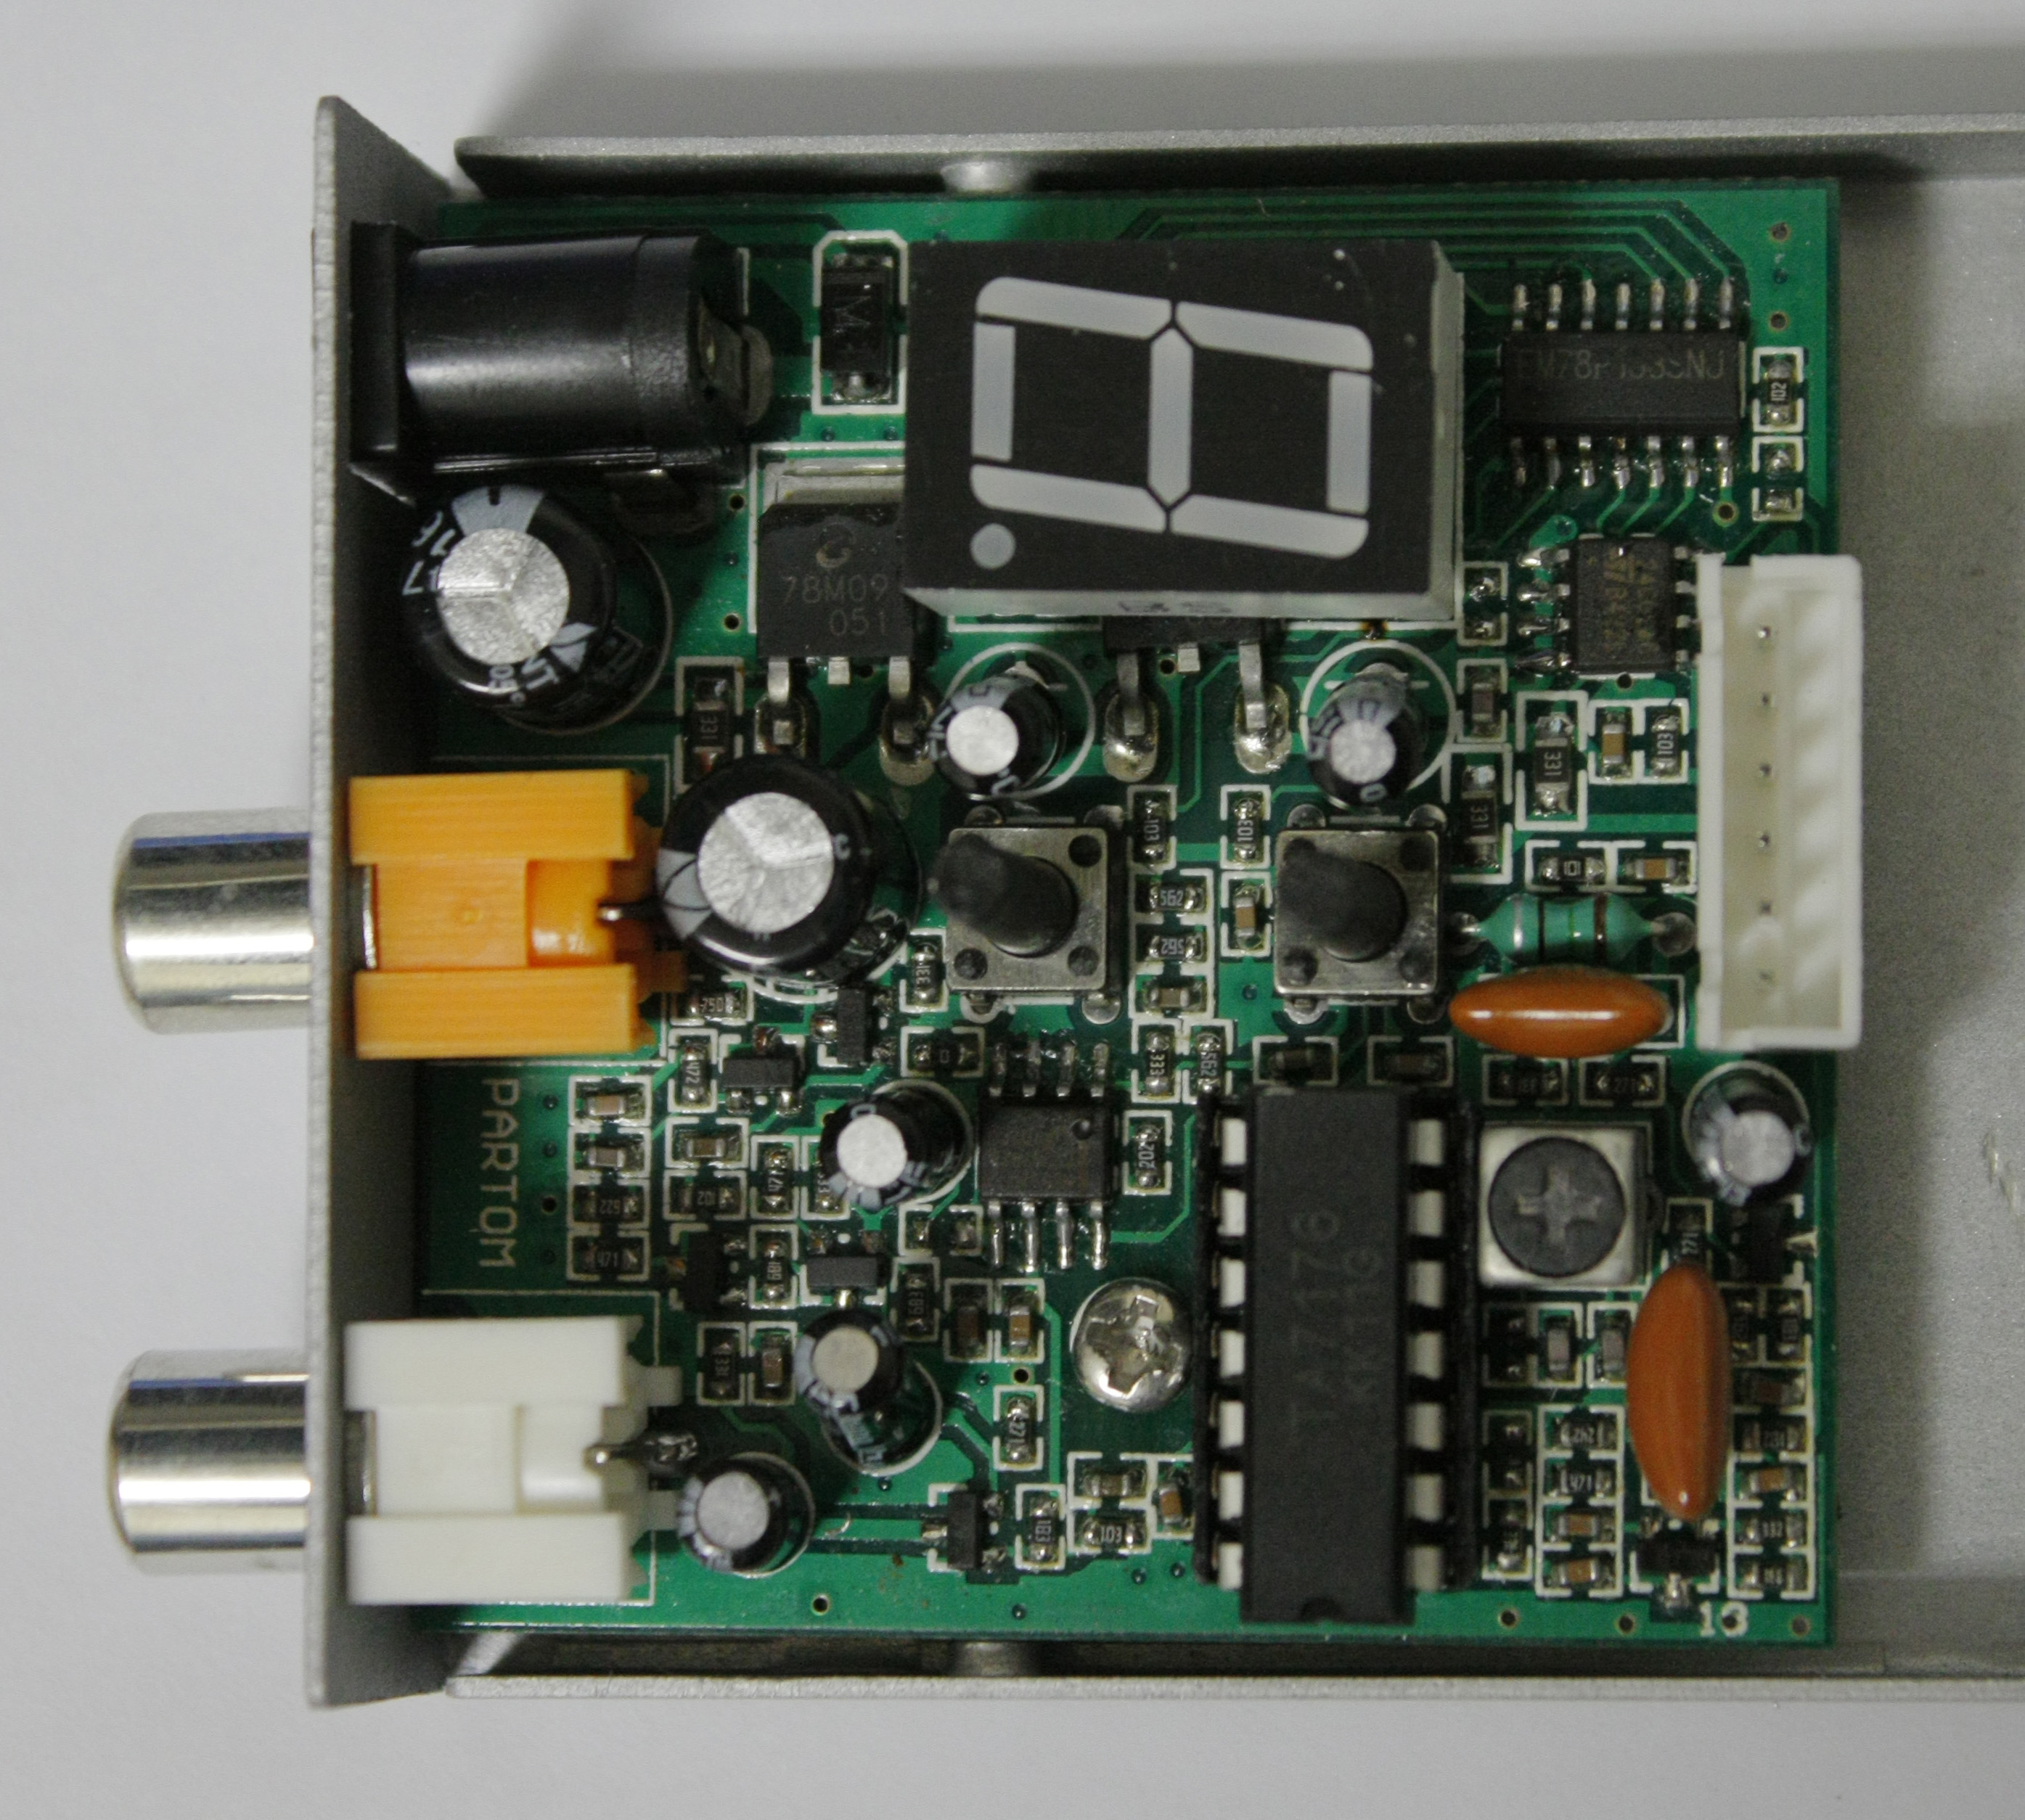 Internals of the video receiver